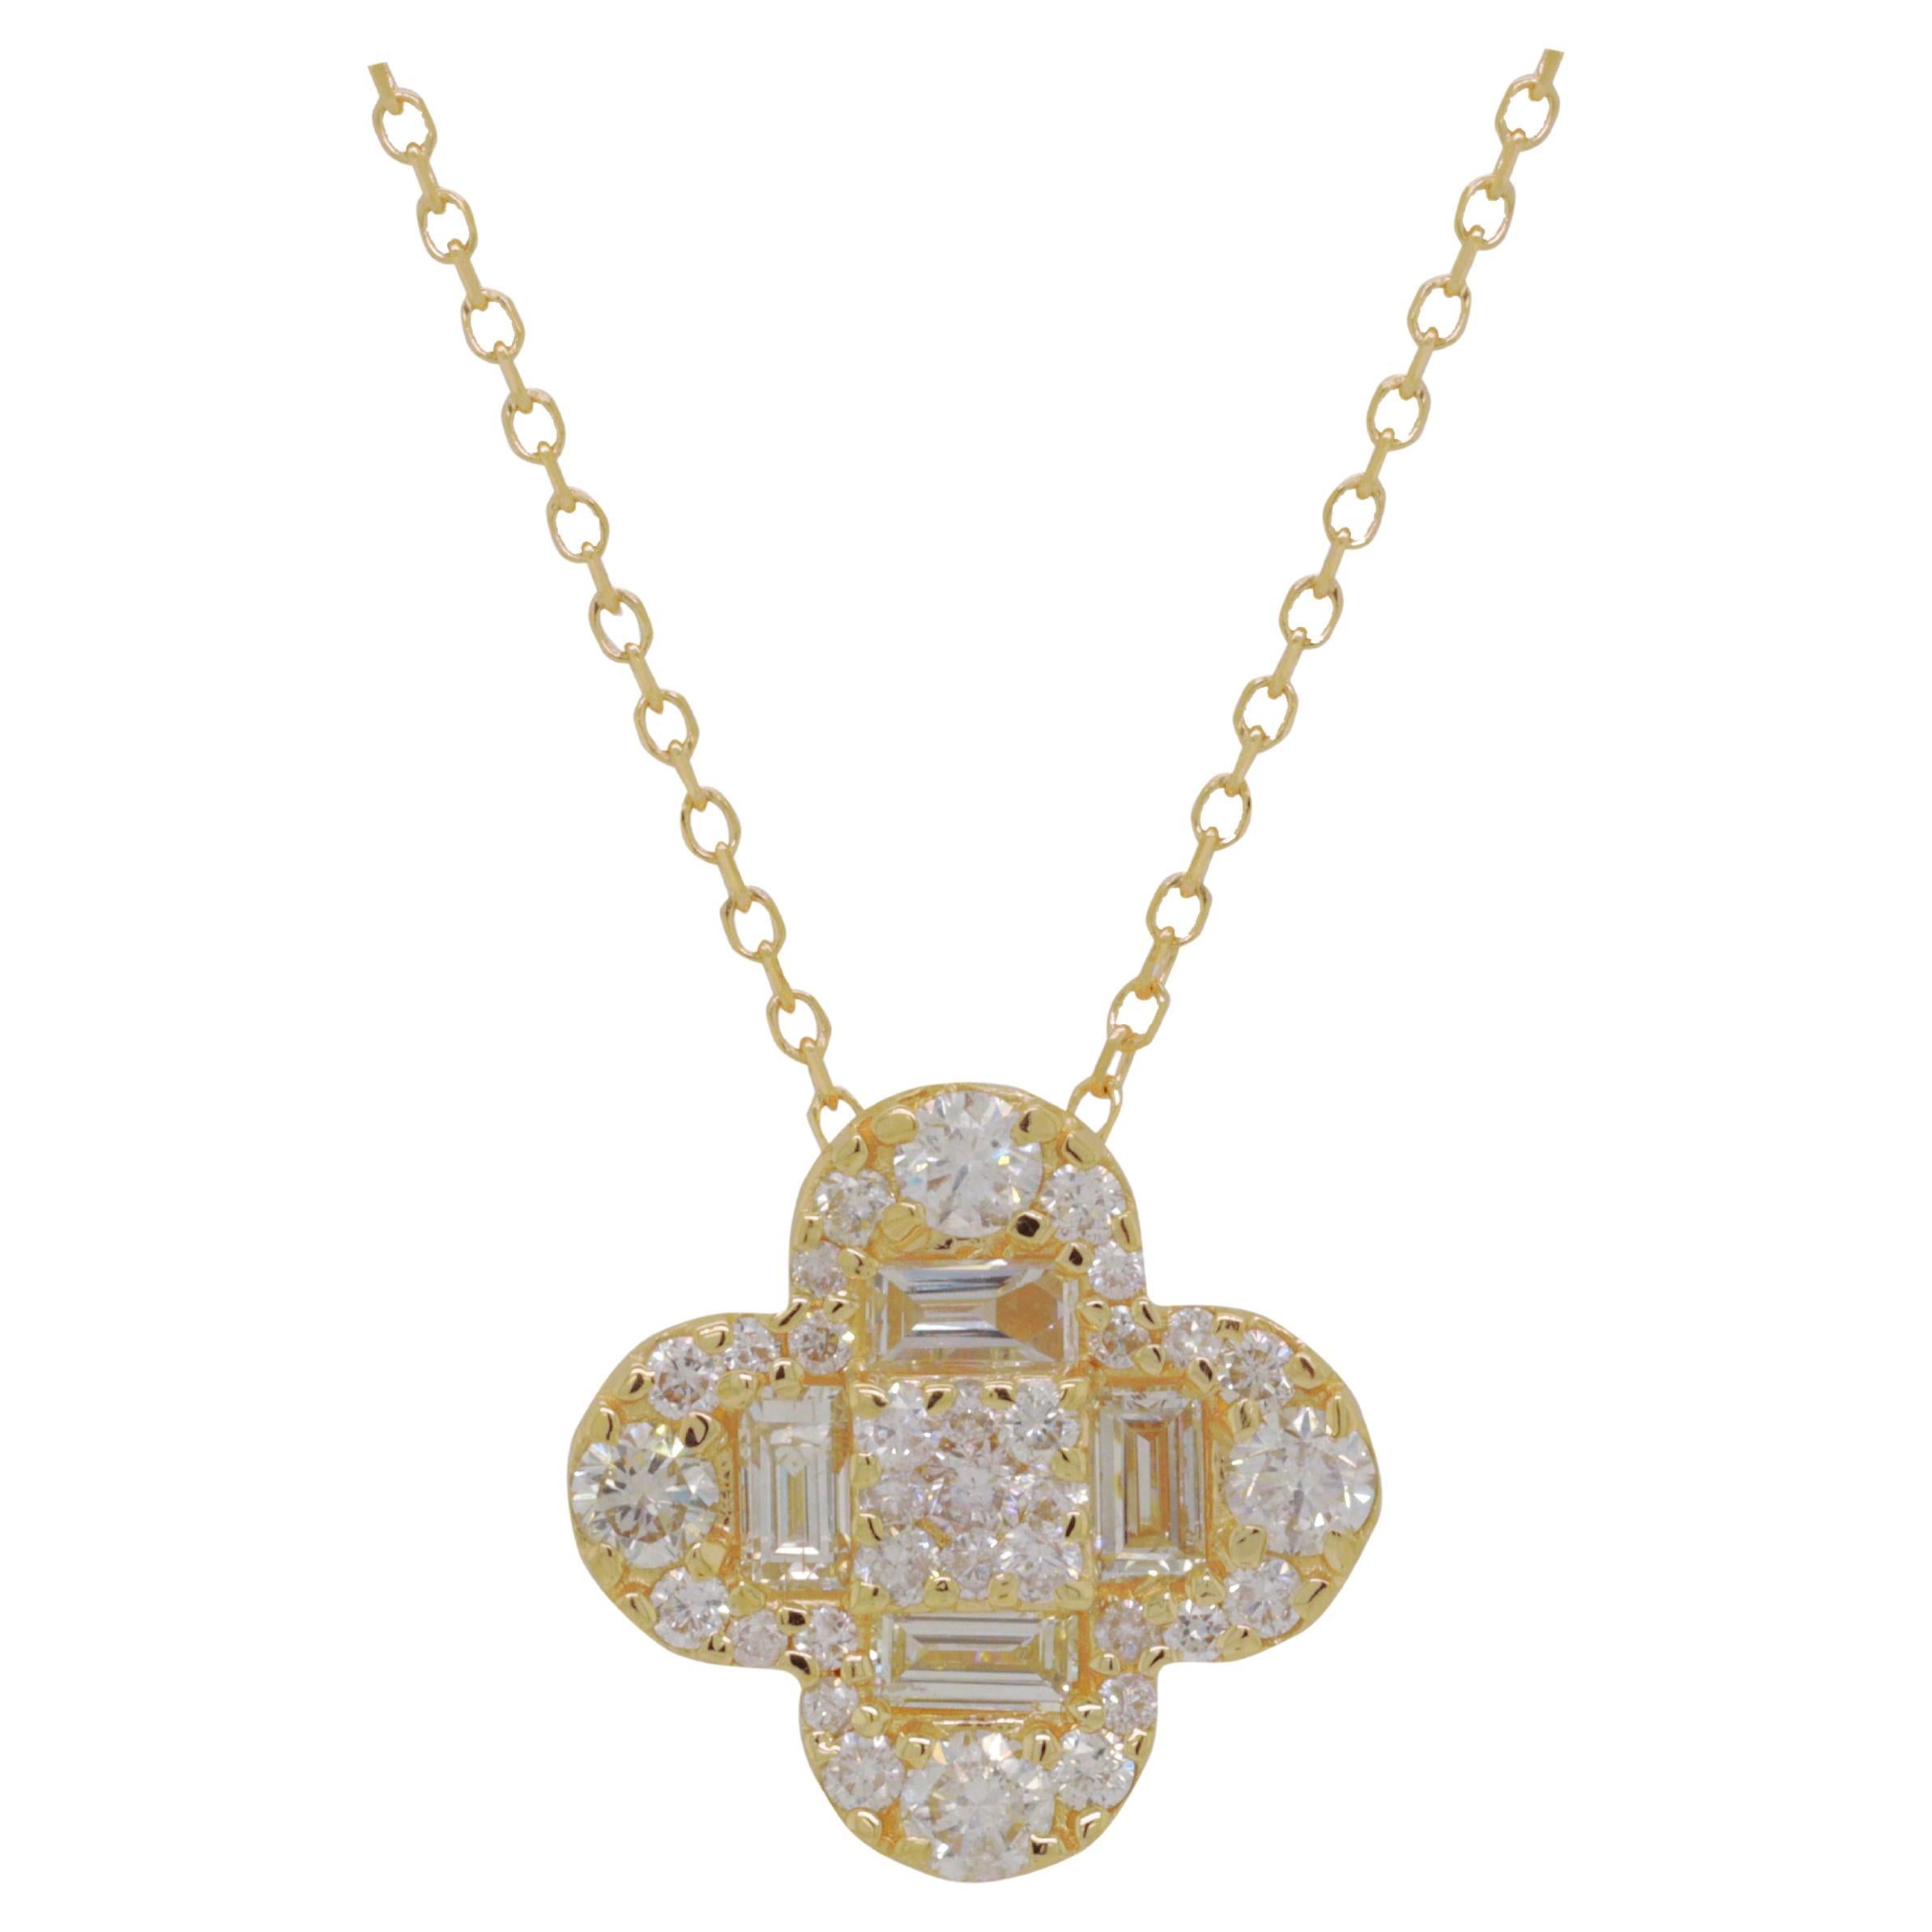 Diana M. 14 kt yellow gold diamond pendant with clover-shaped design  For Sale